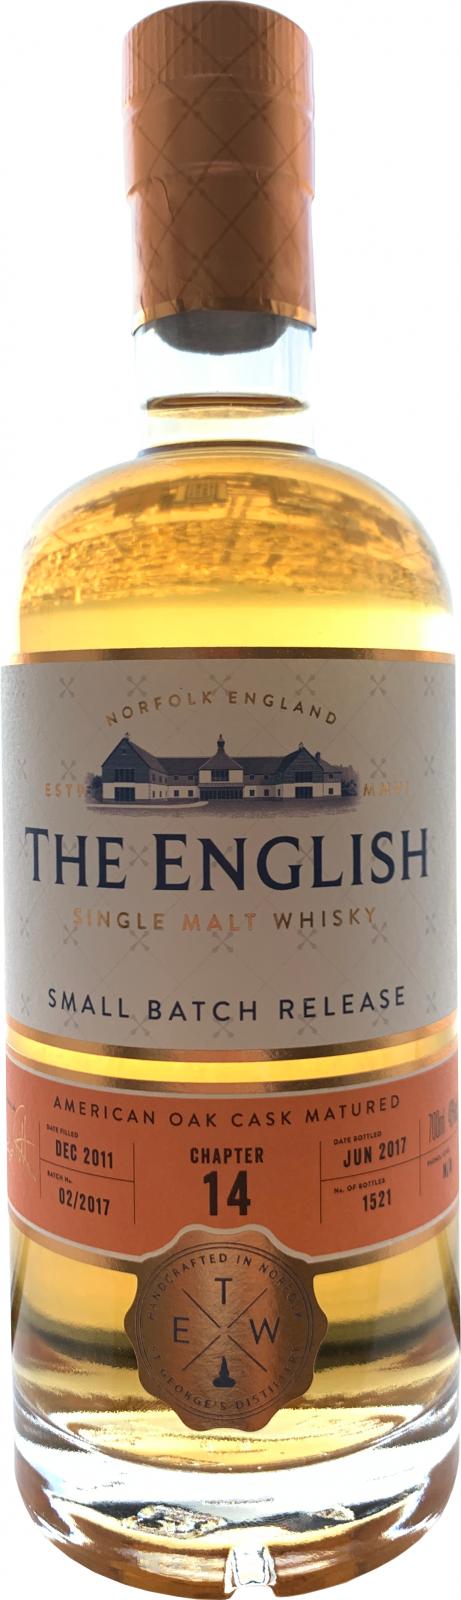 The English Whisky 2011